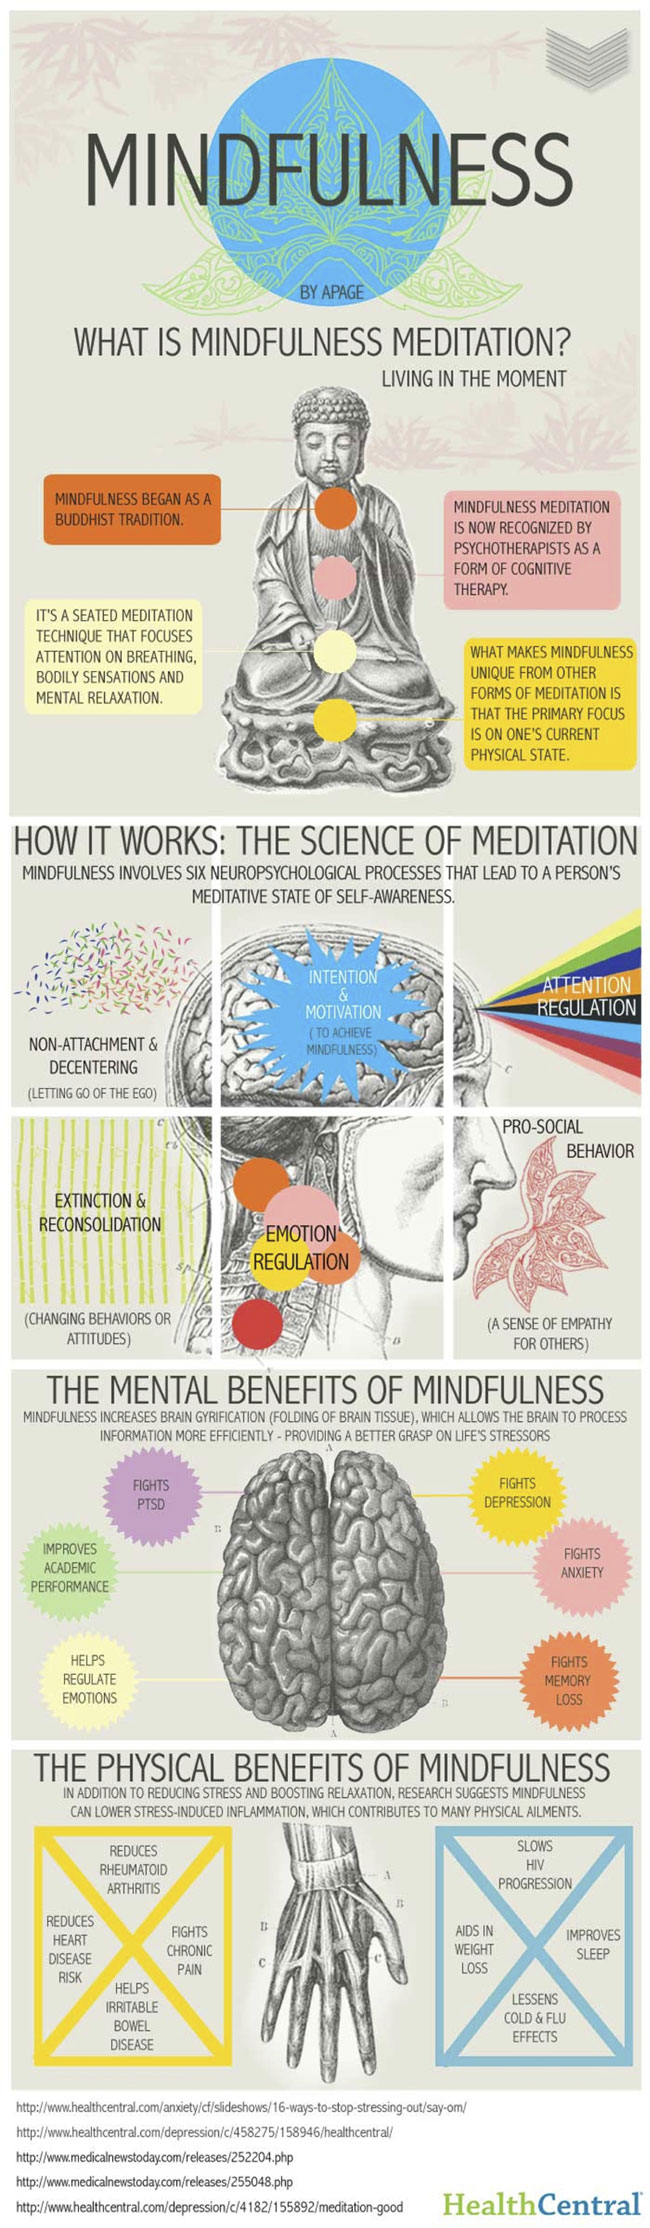 Mental and Physical Benefits of Mindfulness Meditation